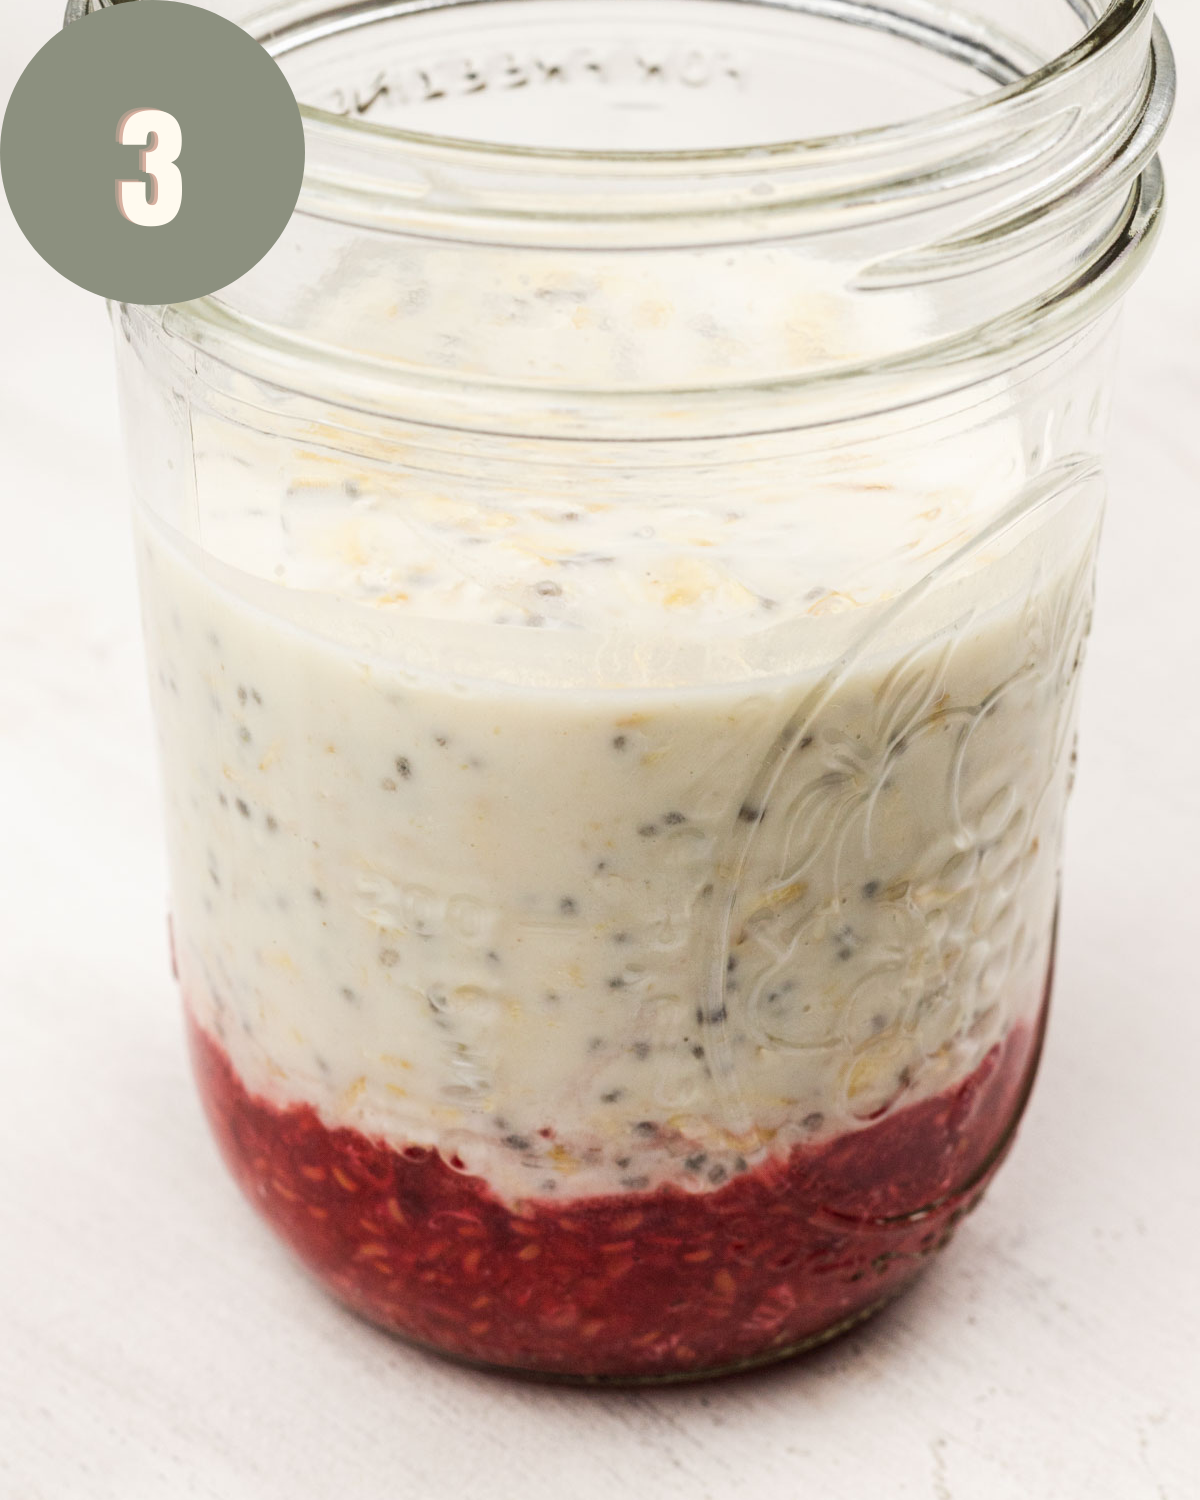 raspberries and oats together in a clear mason jar before sitting overnight